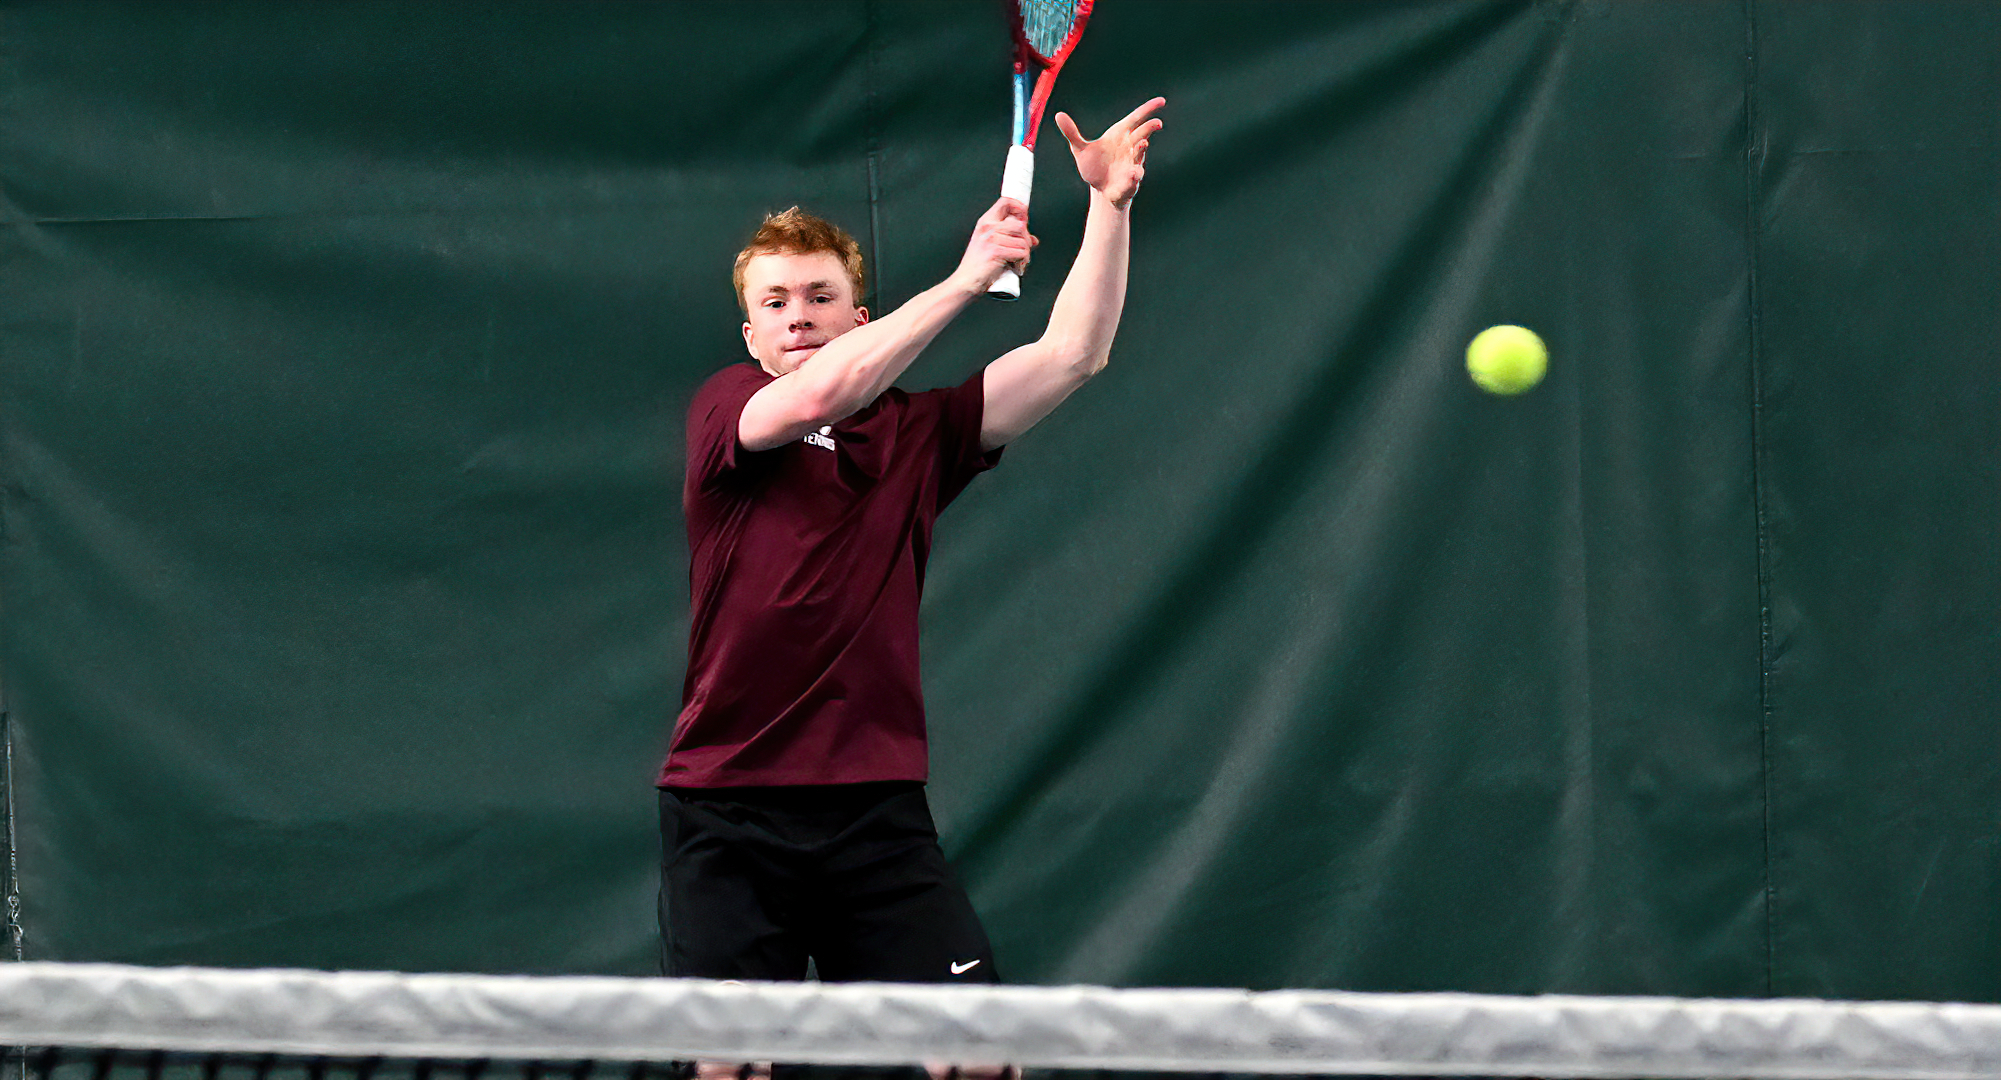 Freshman Hunter Rice claimed one of the three team points against St. Schloastica as he posted a win in the super-set tie-breaker at No.5 singles.